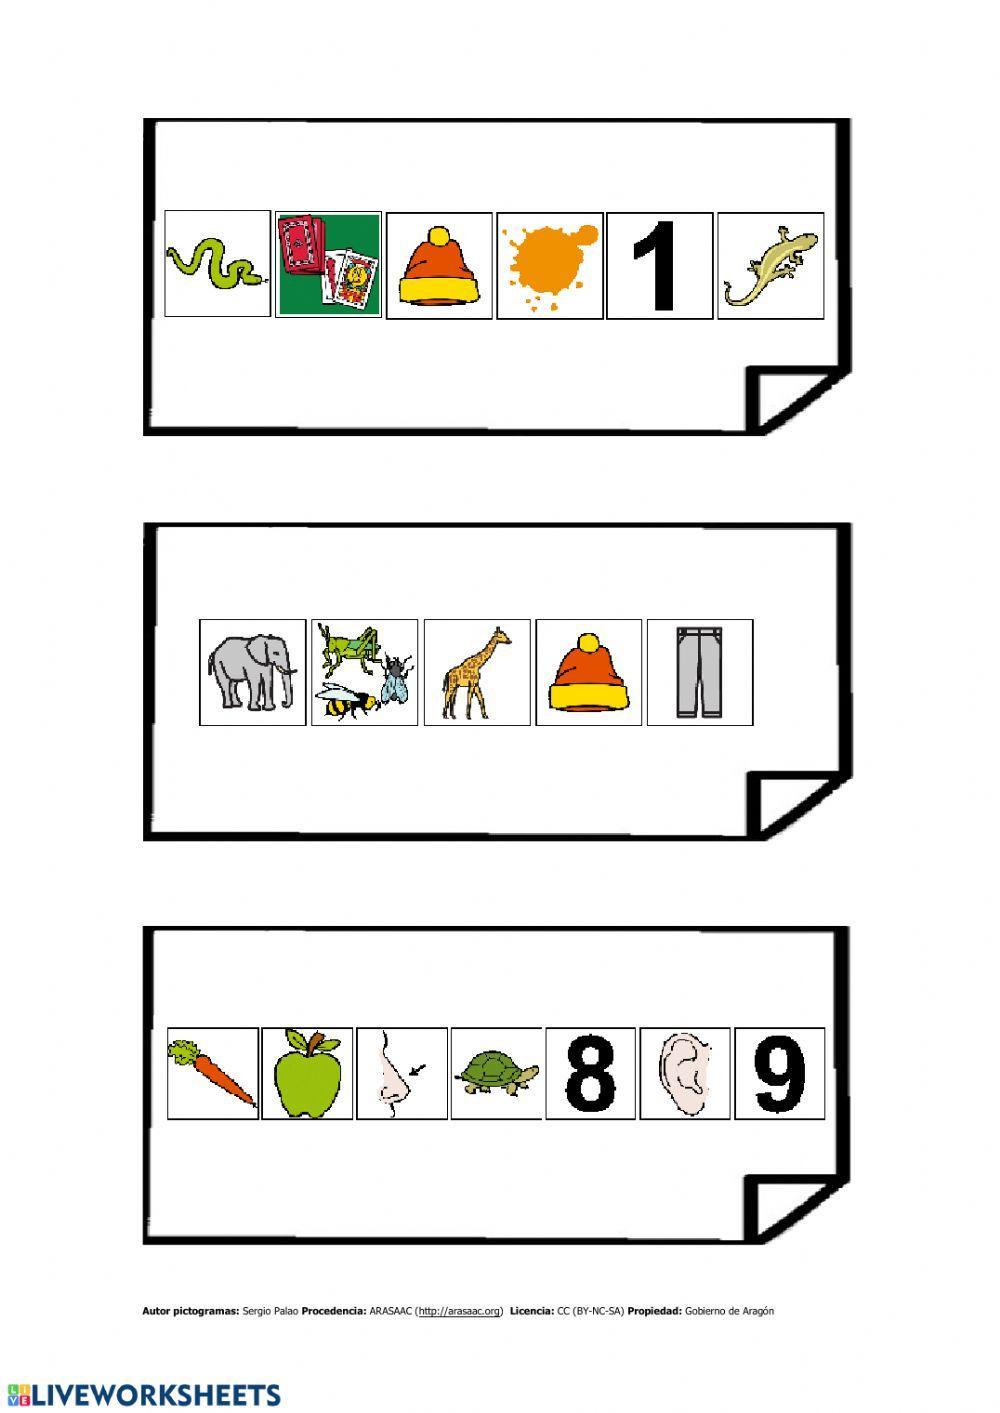 Secret messages: colours, numbers, animals, clothes, food, house and school.